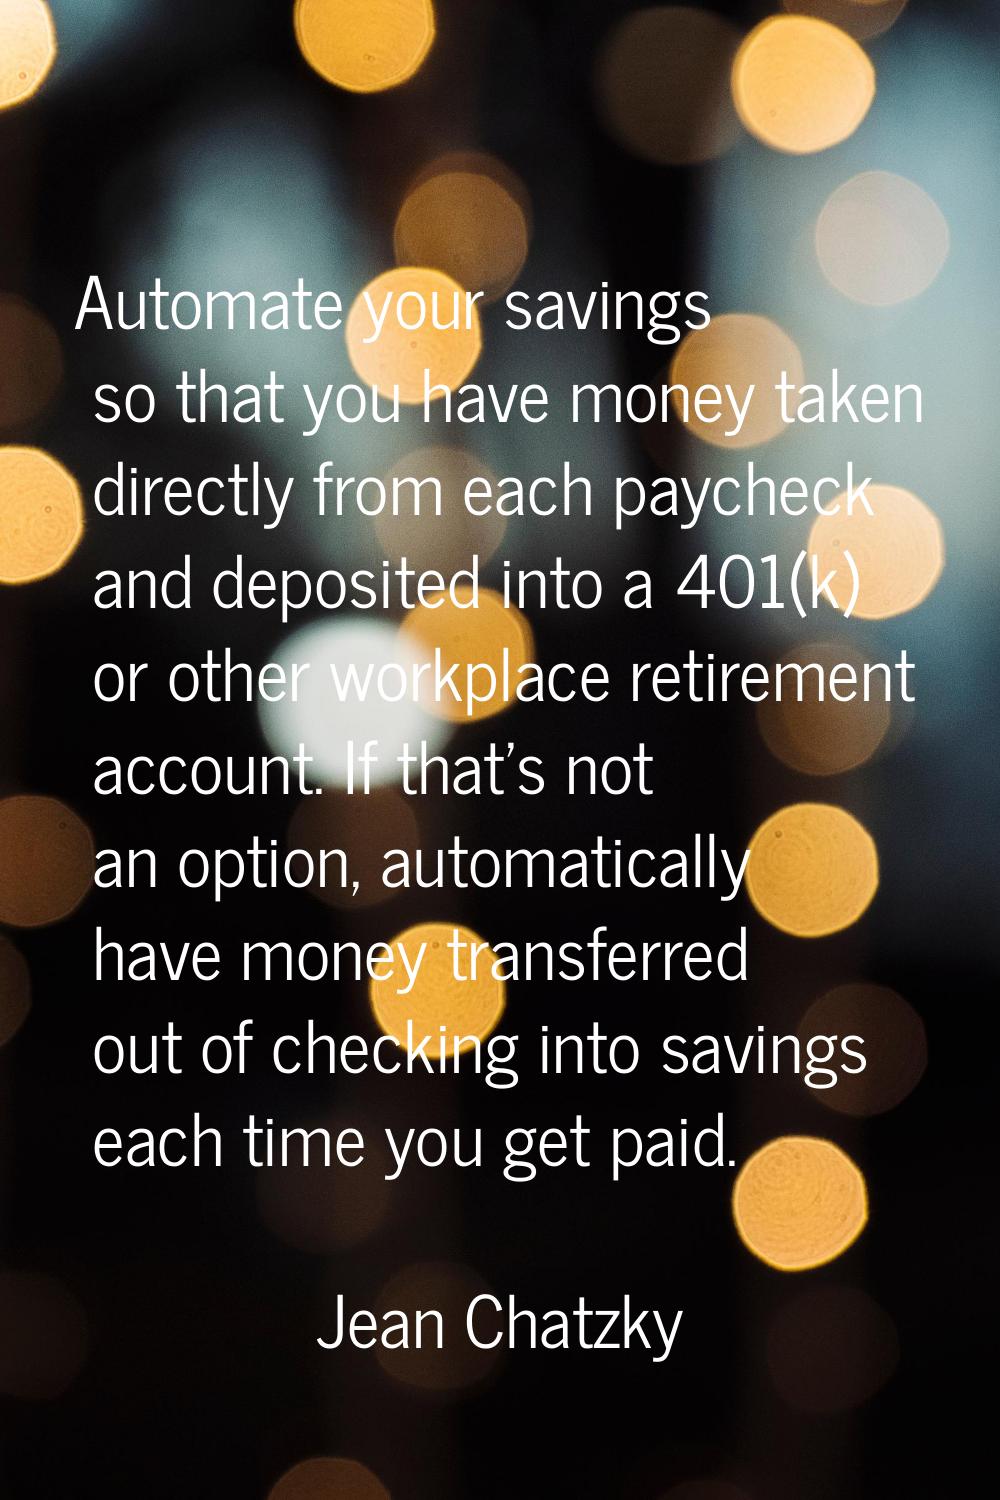 Automate your savings so that you have money taken directly from each paycheck and deposited into a